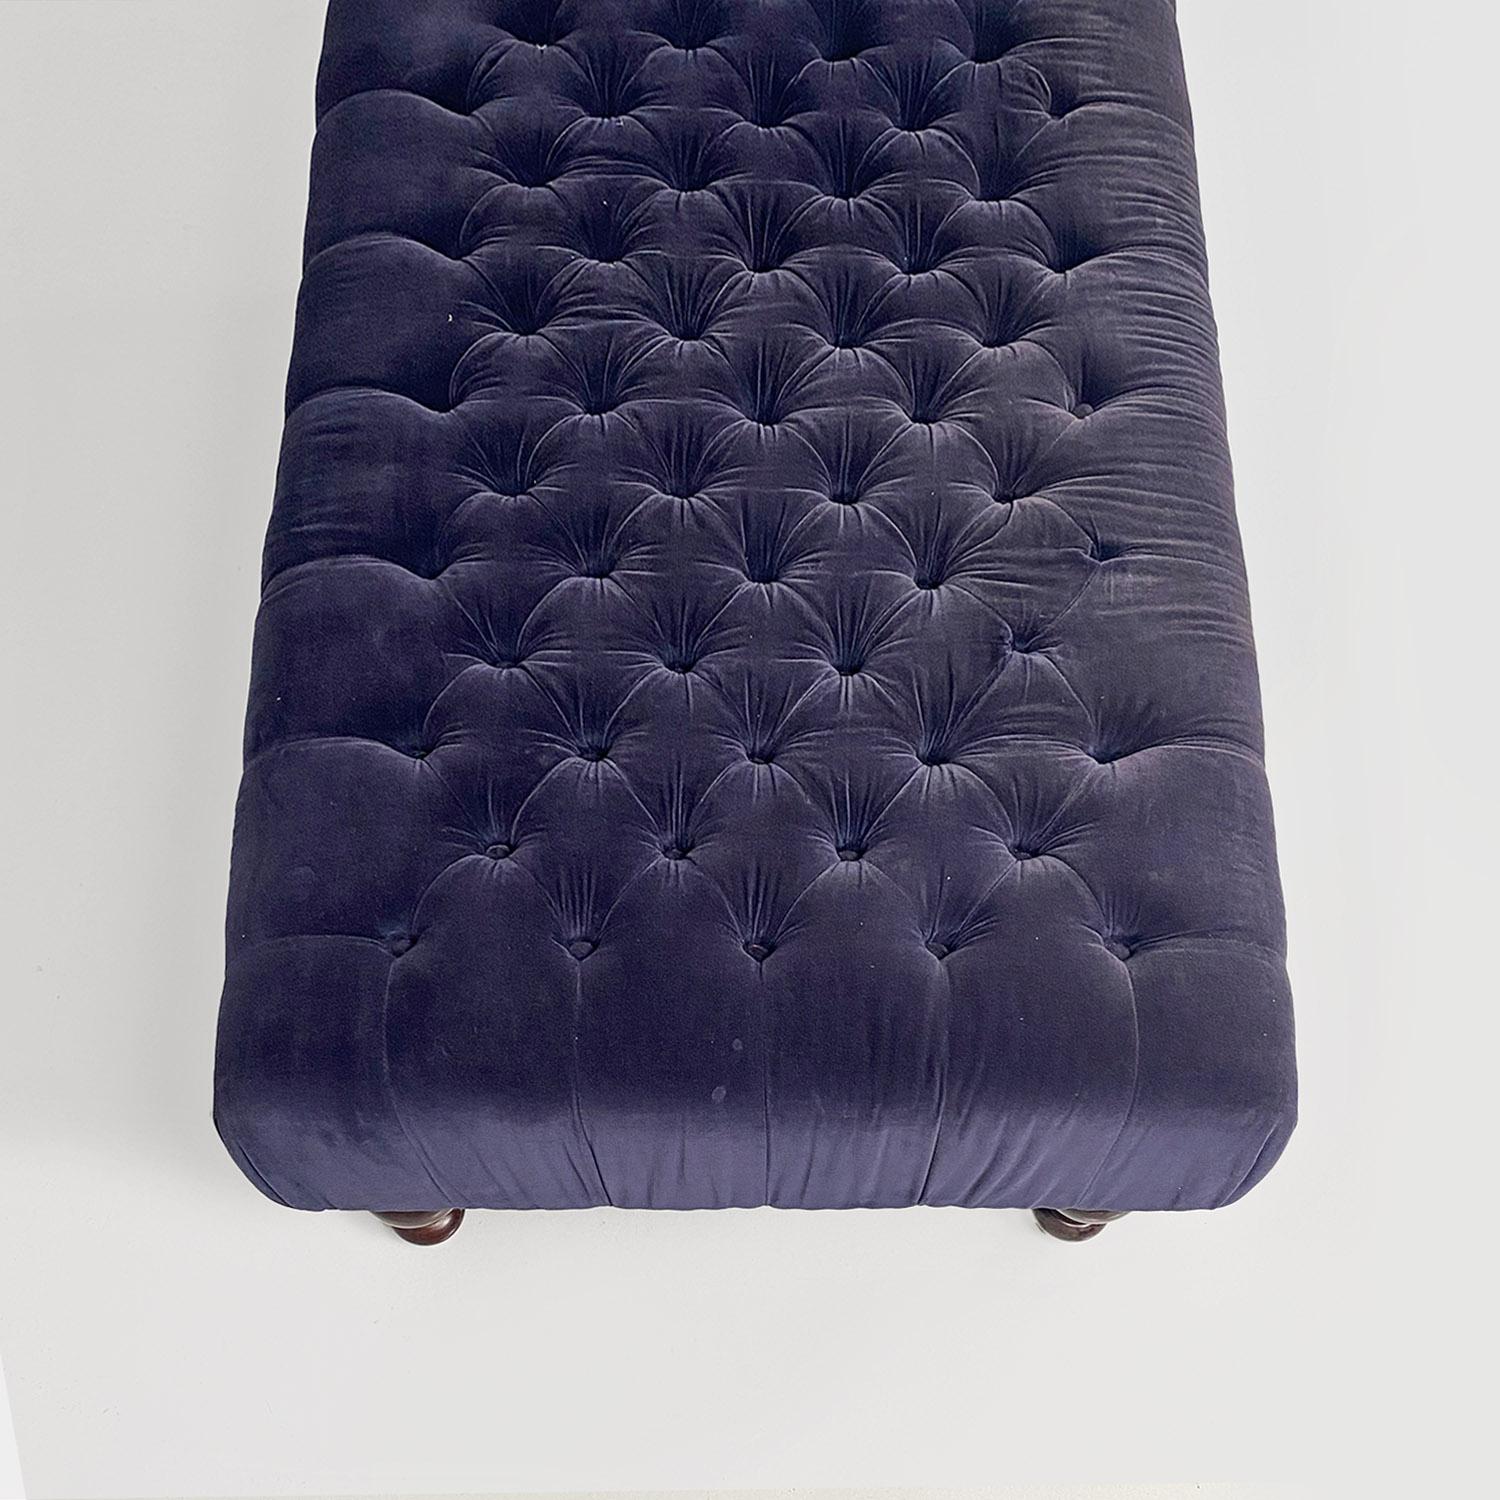 Italian antique style blue velvet and wood dormeuse or chaise longue, 1980s For Sale 4